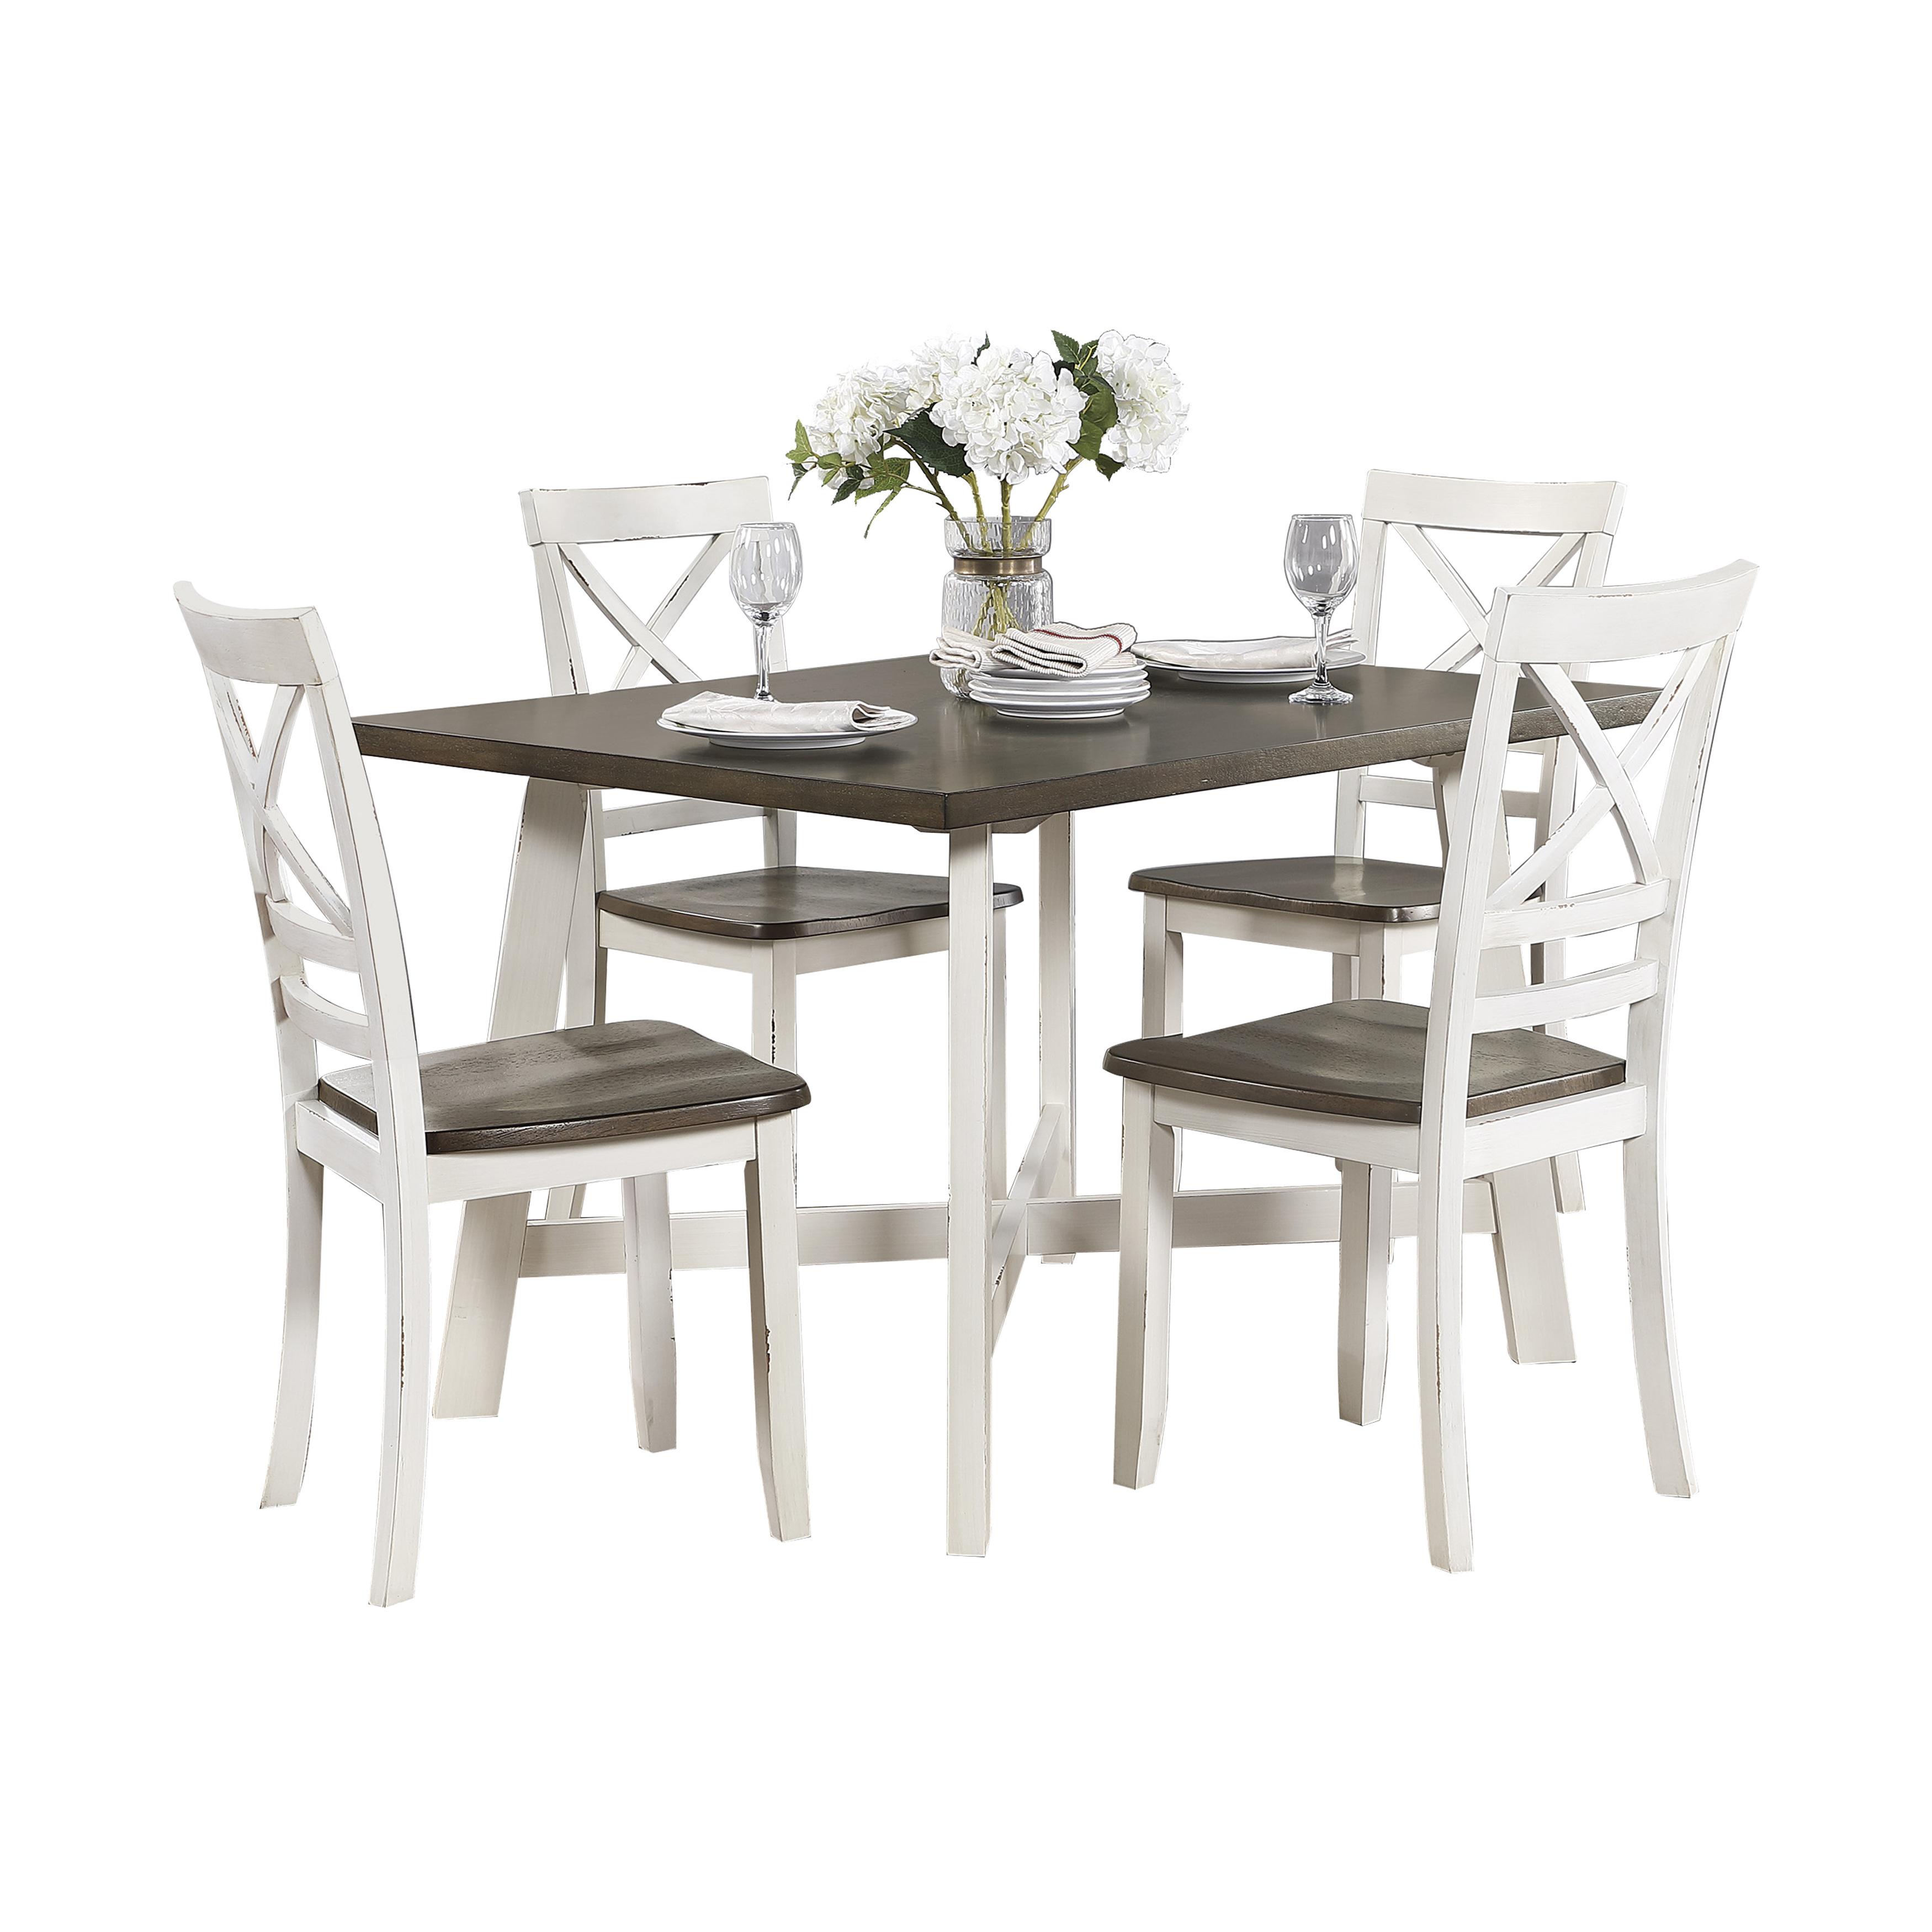 Modern Dining Room Set 5777WH Troy 5777WH in Antique White, Cherry 